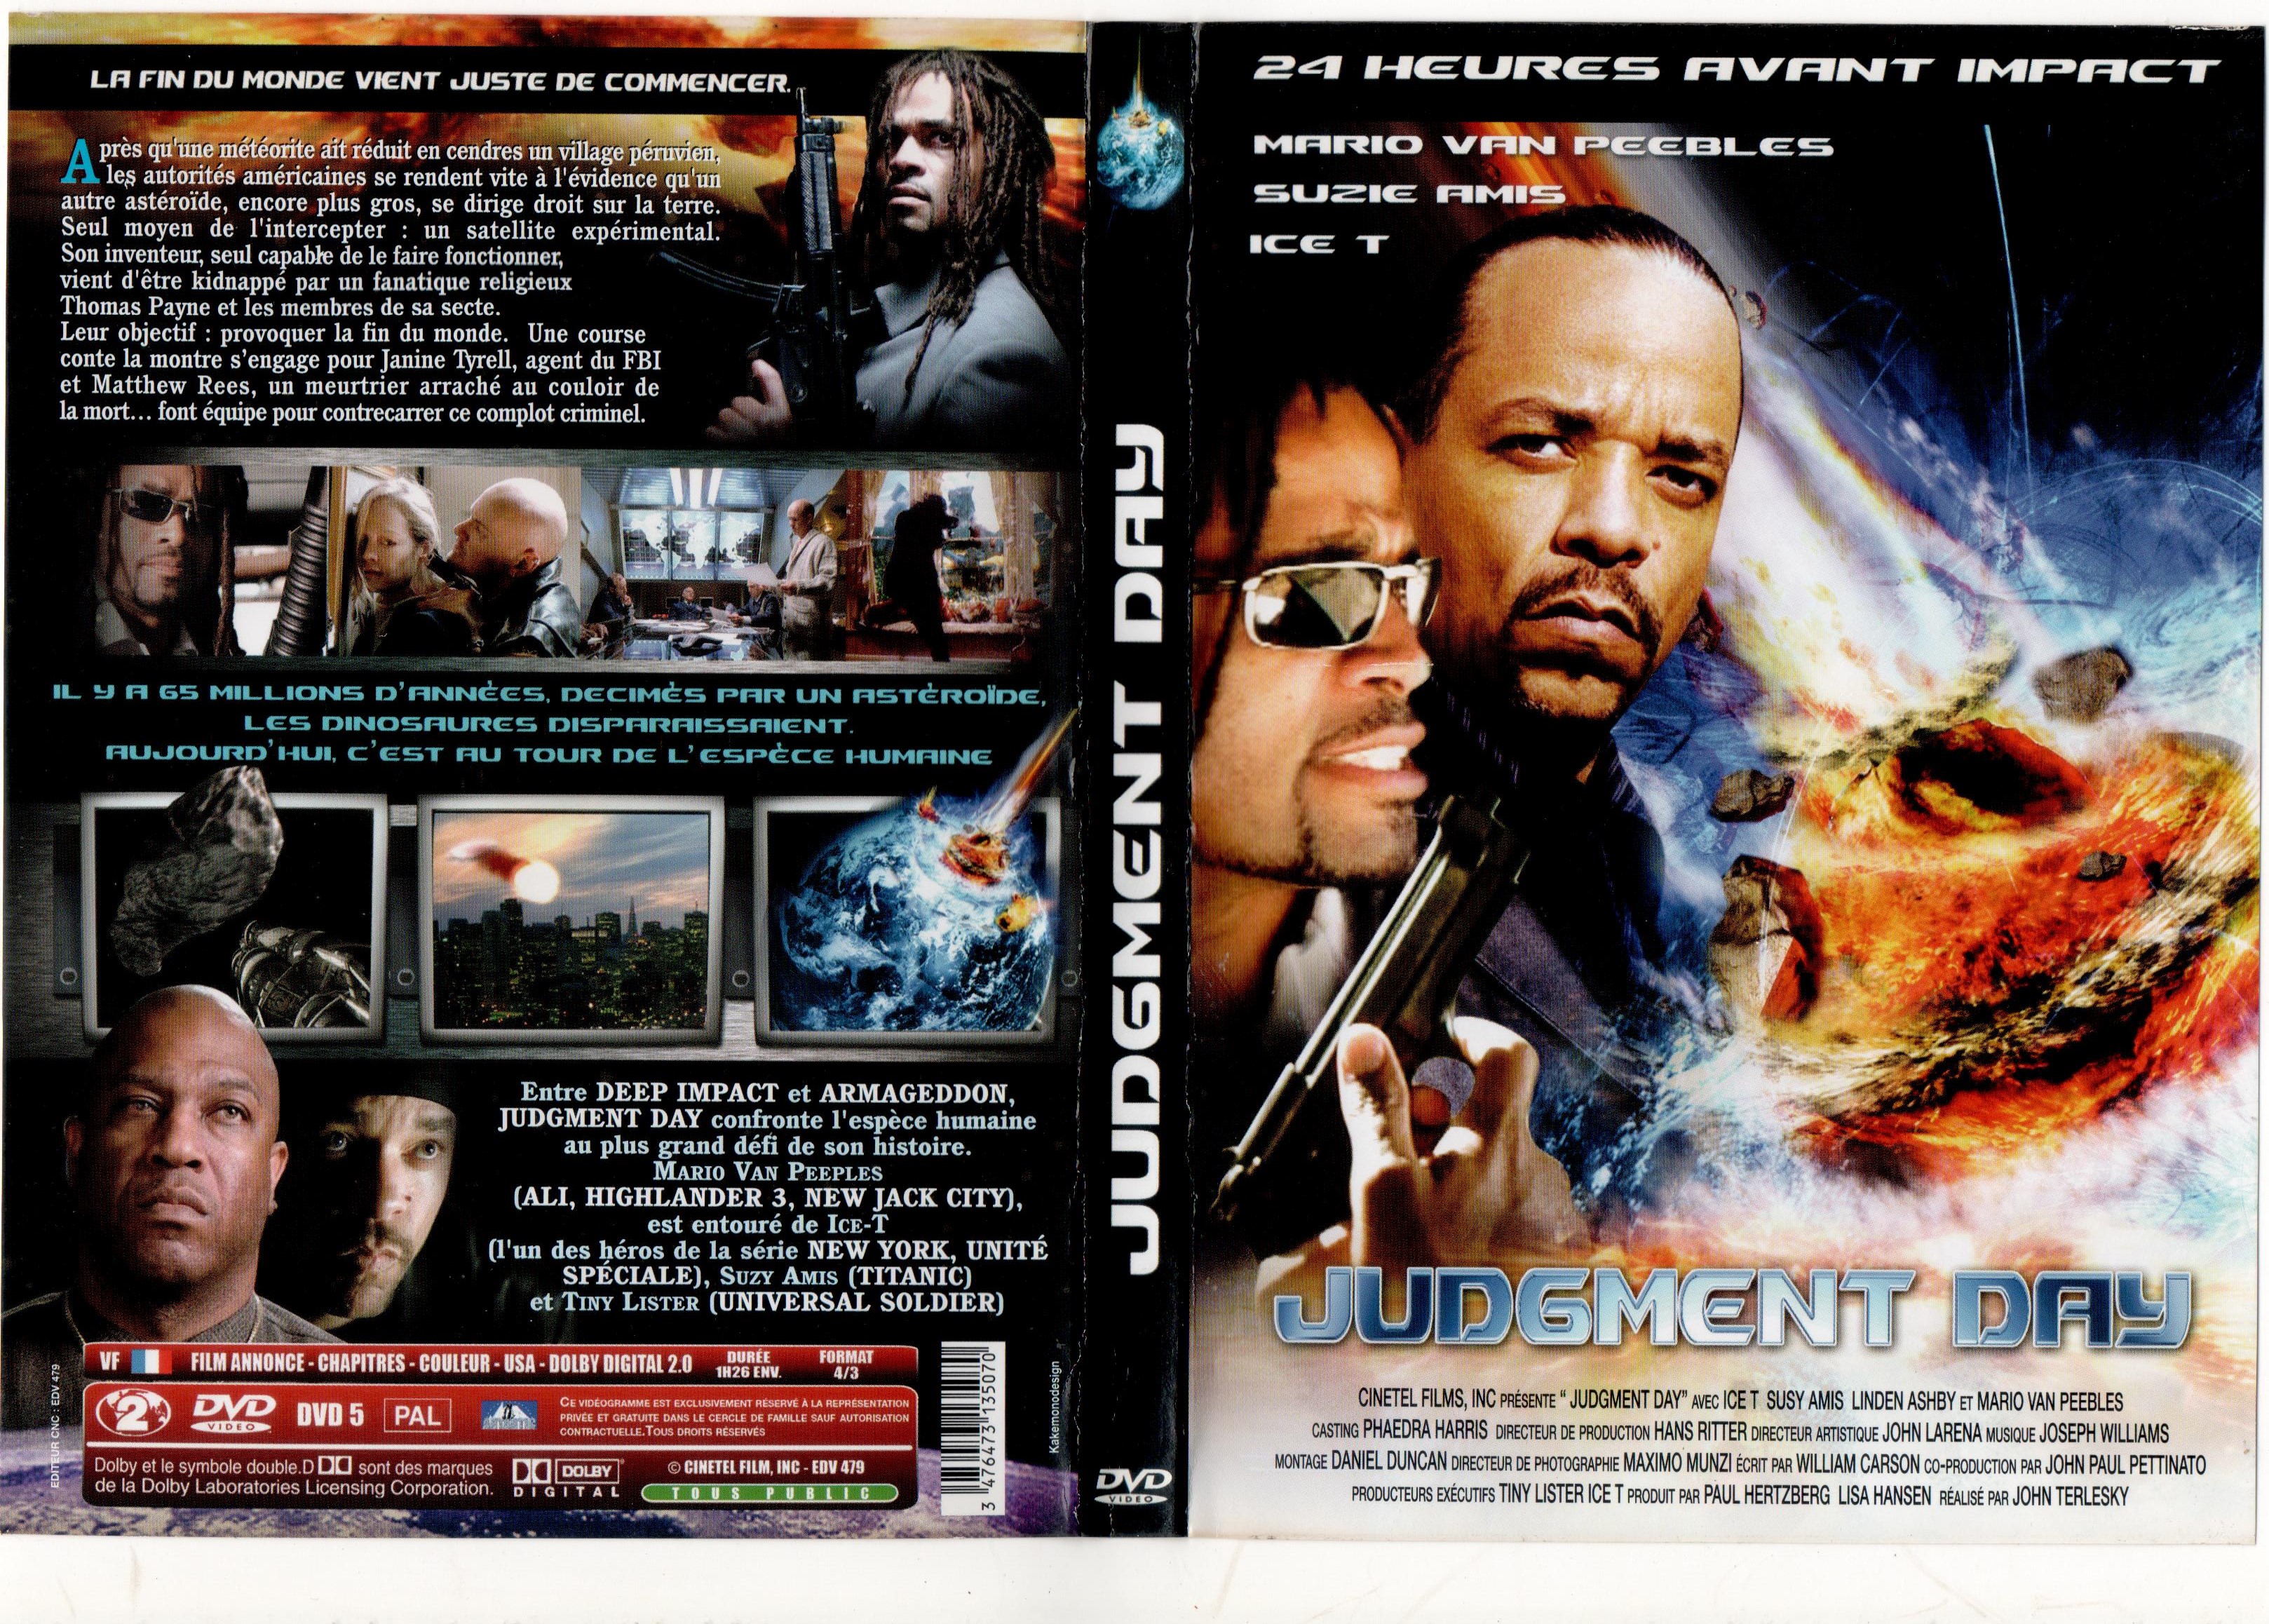 Jaquette DVD Judgment day v2